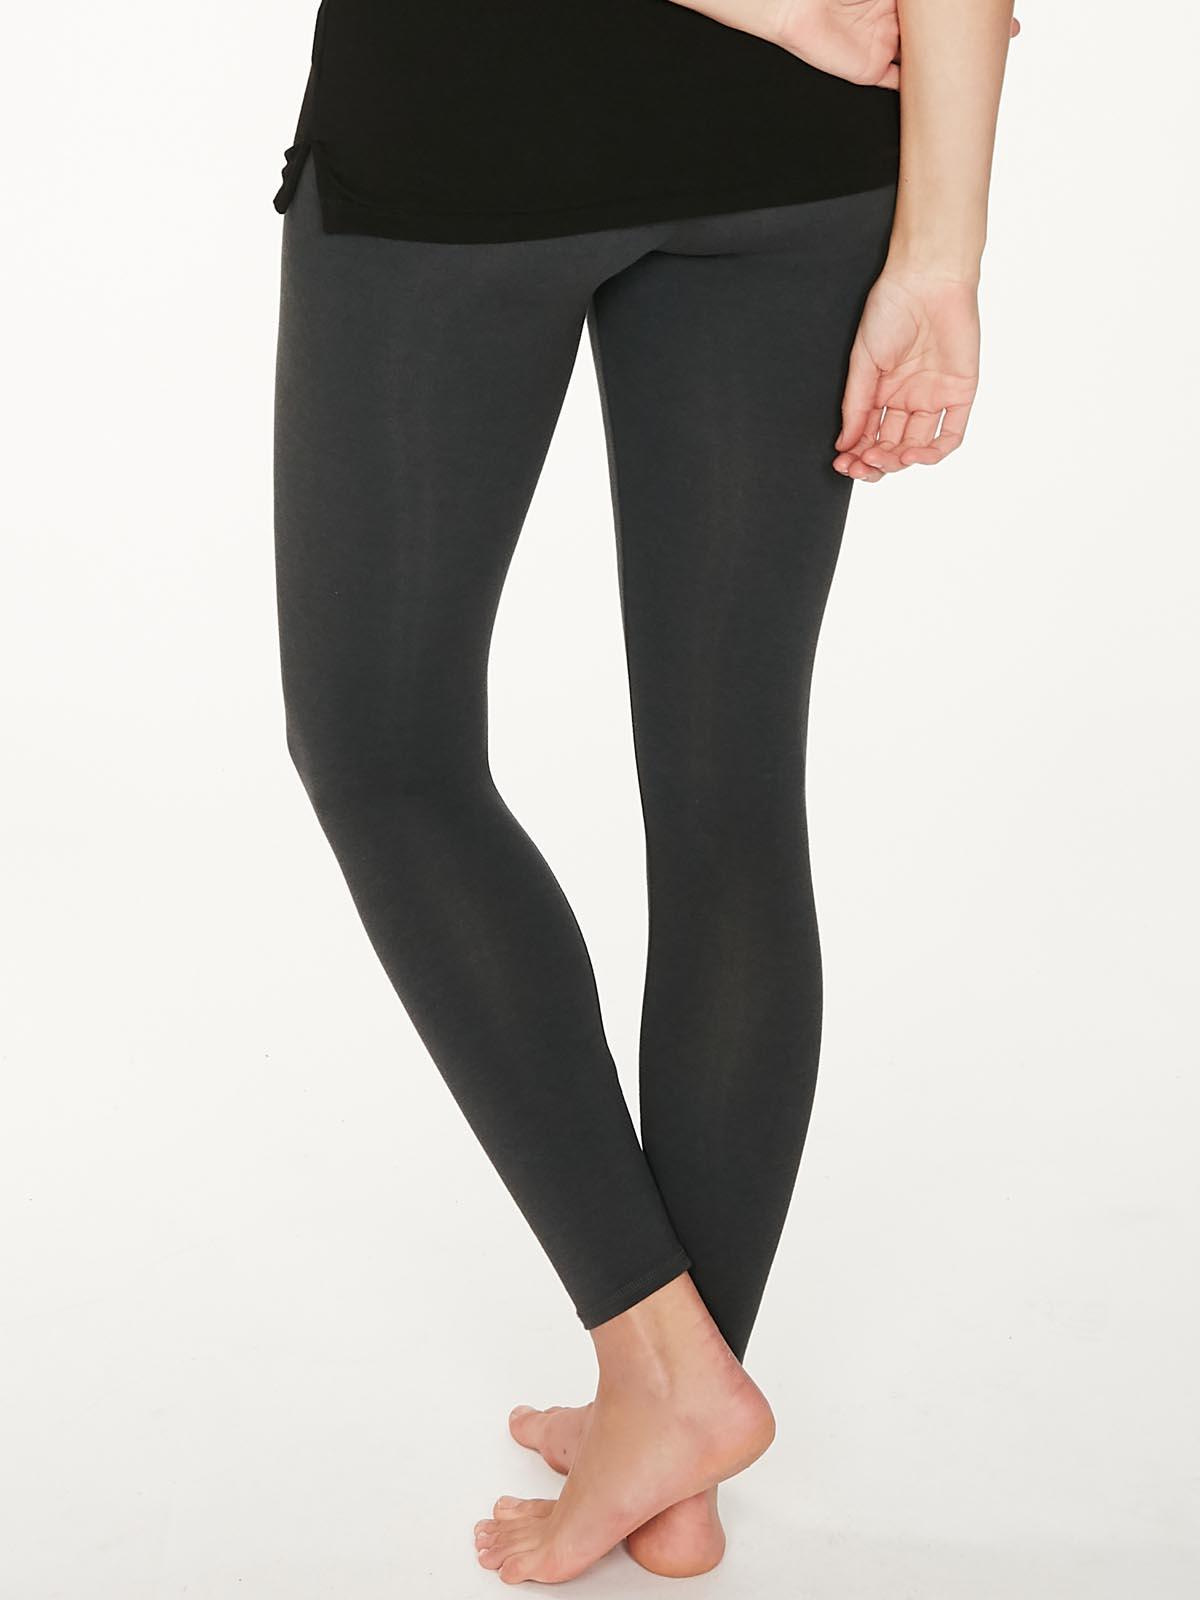 Boody Women's Full Length Leggings Size M - Organic Bamboo - Comfortable &  Breathable EcoWear,Black : Buy Online at Best Price in KSA - Souq is now  : Fashion